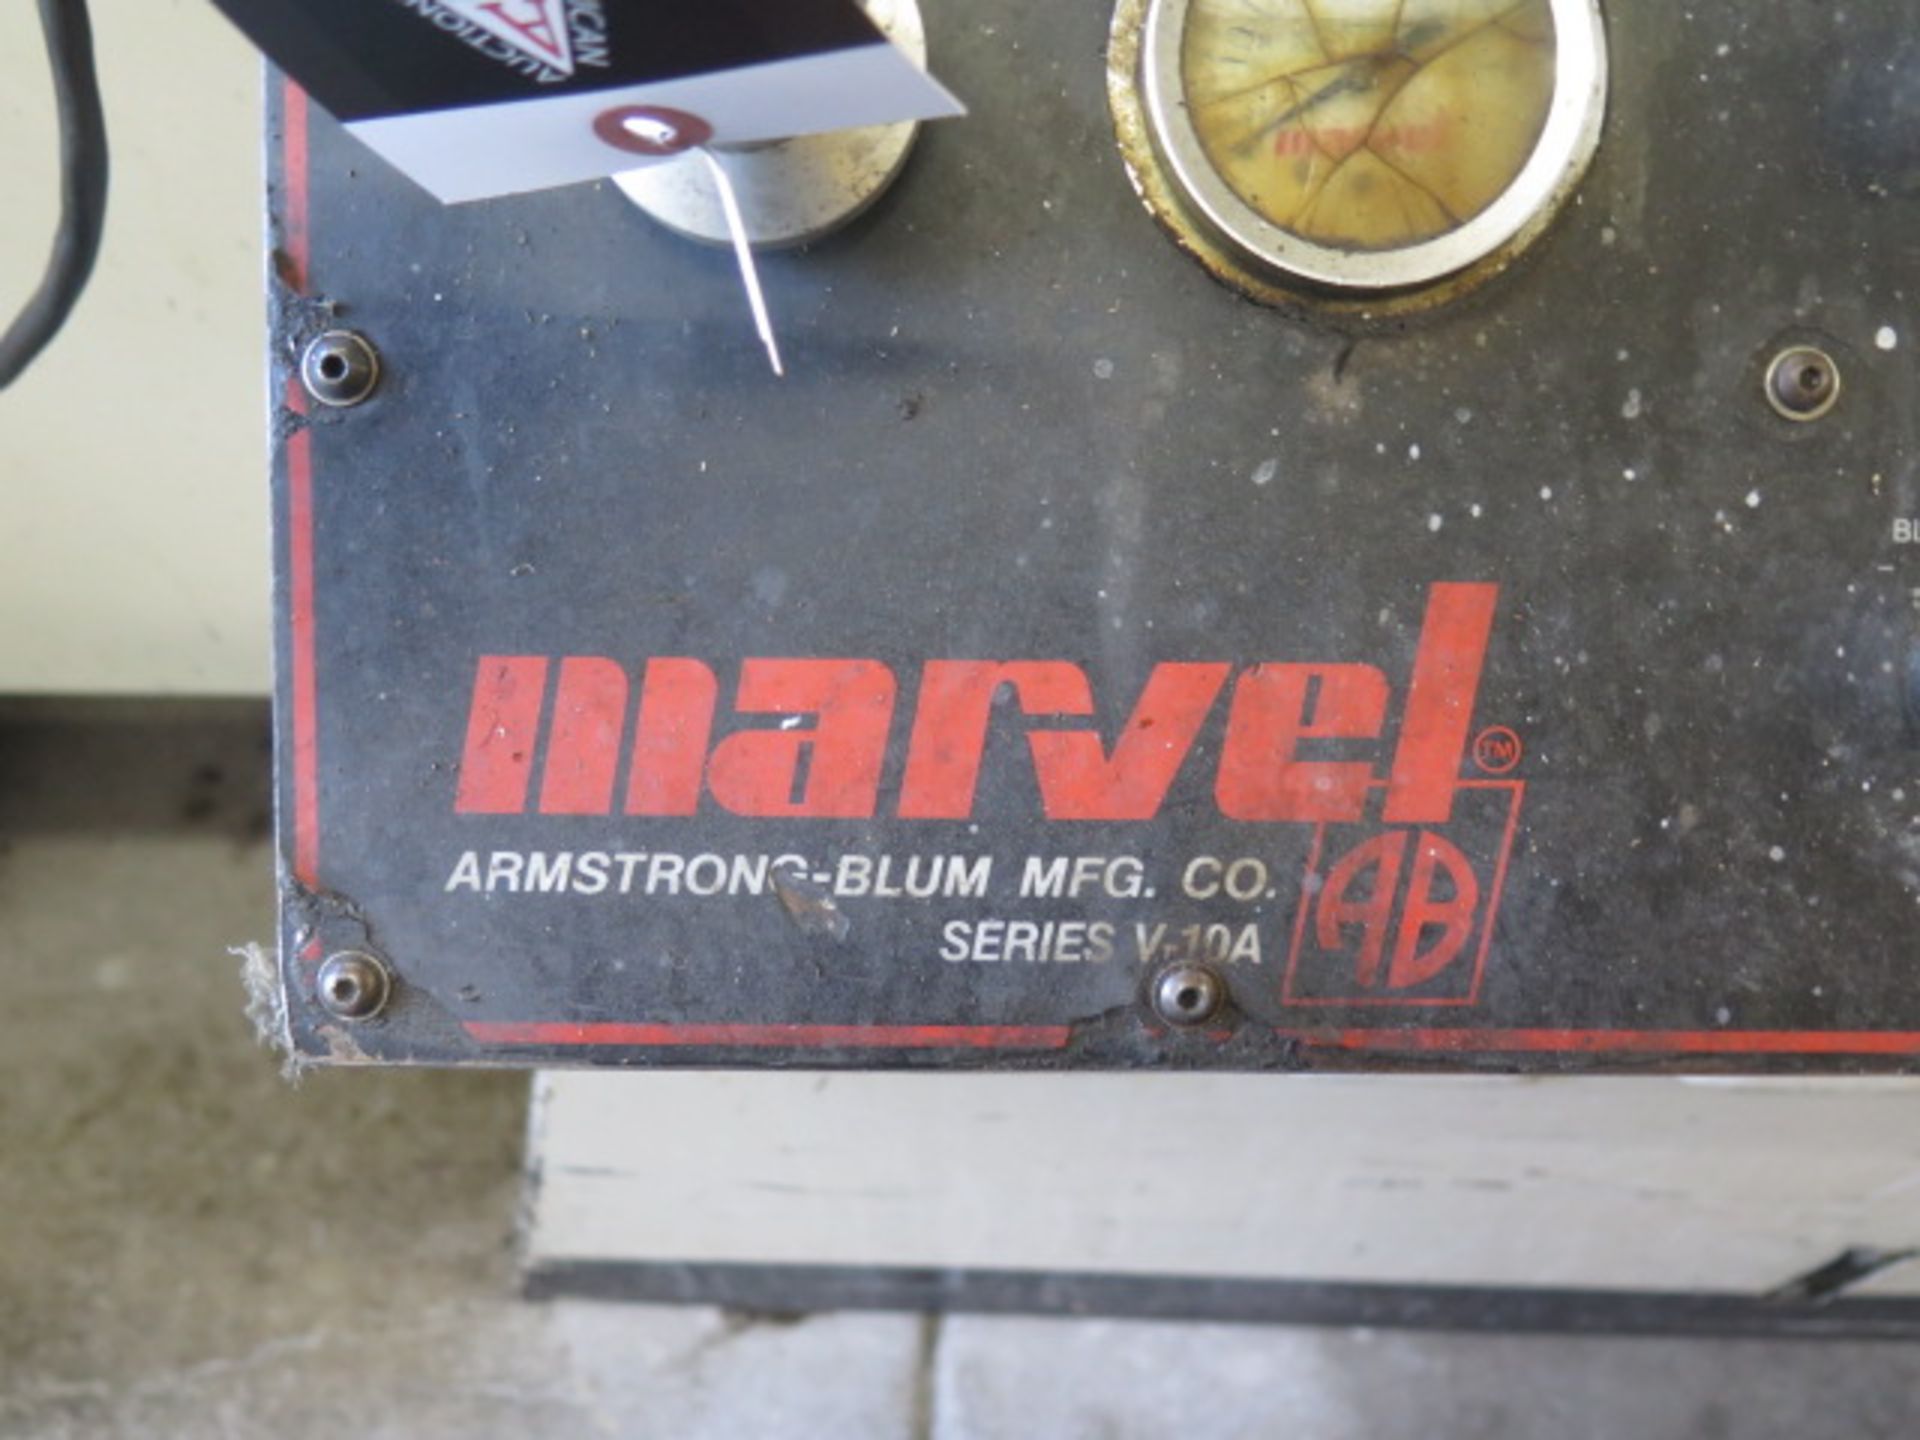 Marvel mdl. V10A2 Vertical Band Saw s/n 170010-W w/ Hydrailic Clamping,Coolamt, Conveyor, SOLD AS IS - Image 11 of 14